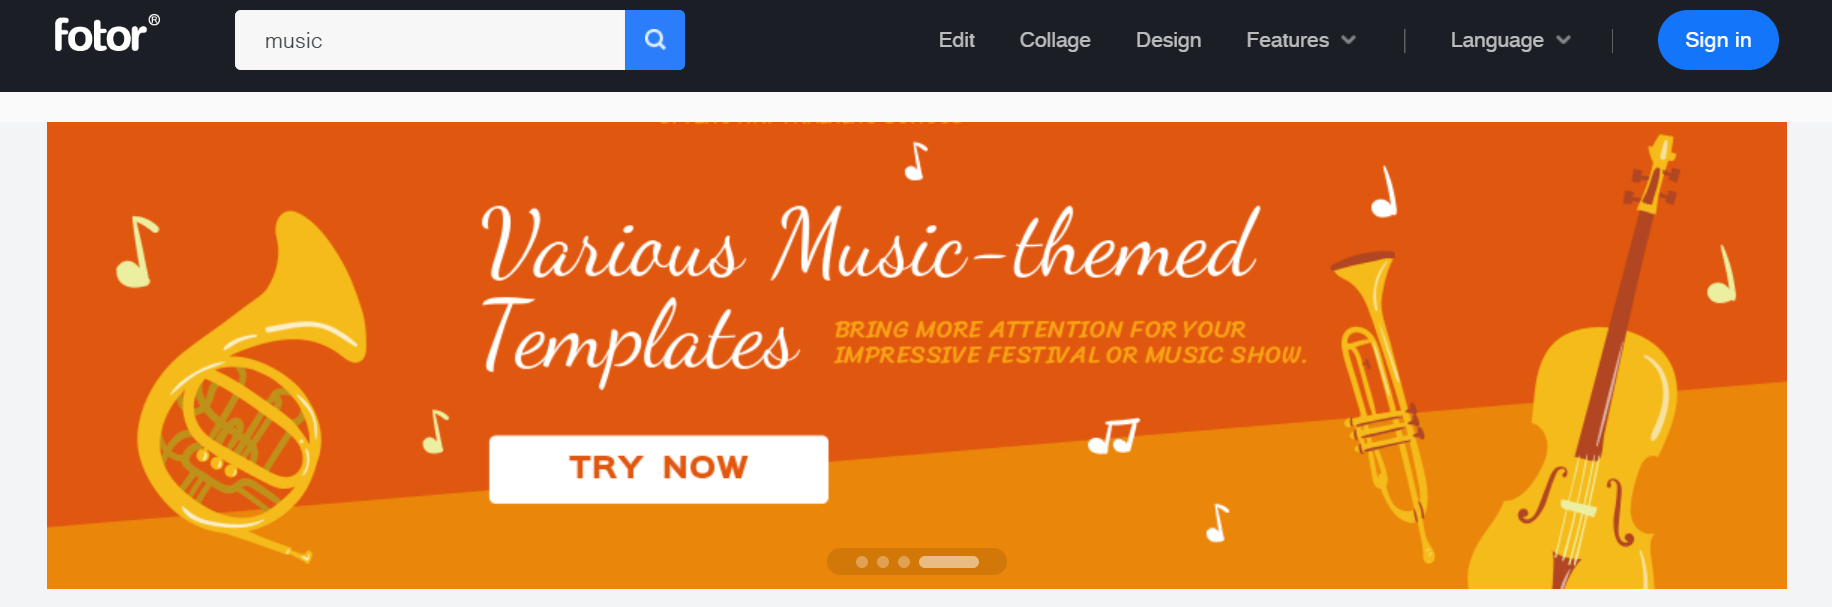 Various music-themed templates from Fotor